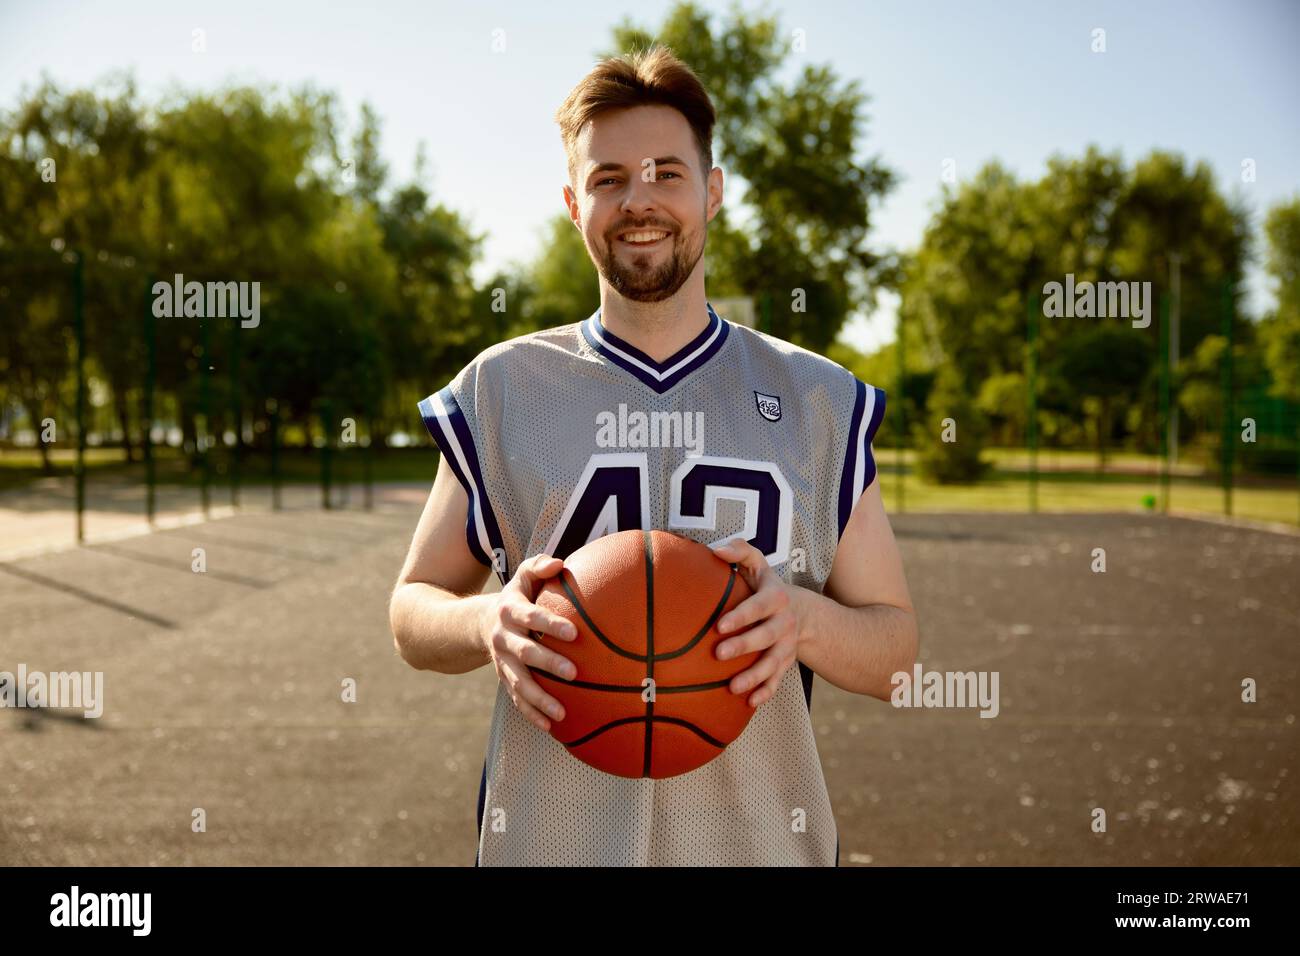 Headshot portrait of smiling happy basketball player looking at camera Stock Photo